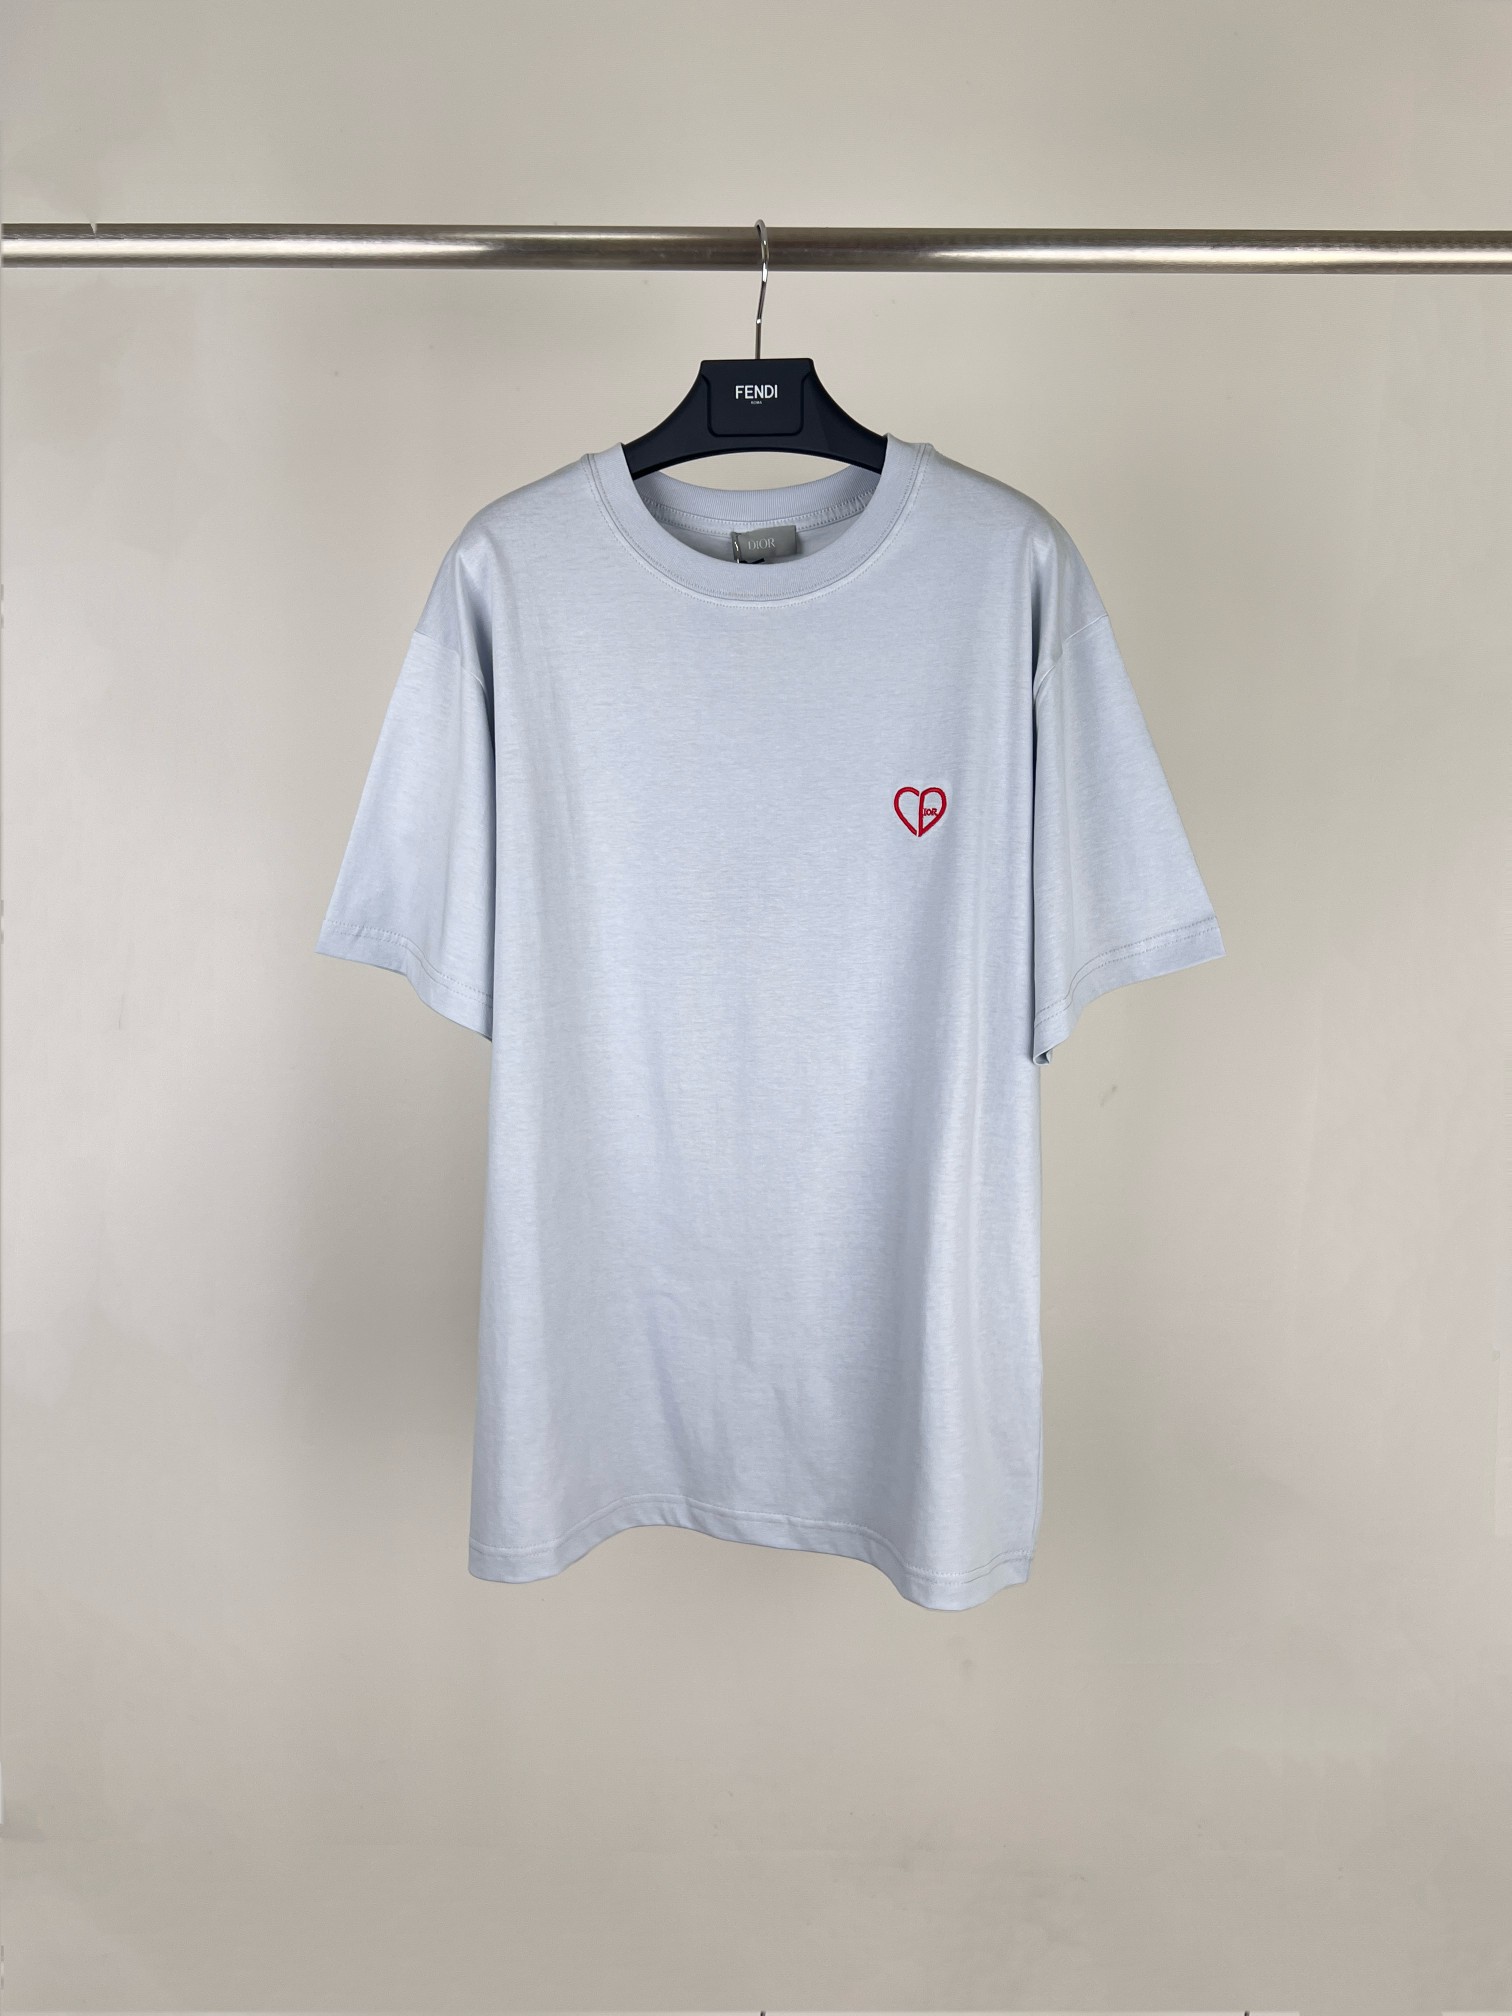 Dior Clothing T-Shirt Embroidery Short Sleeve